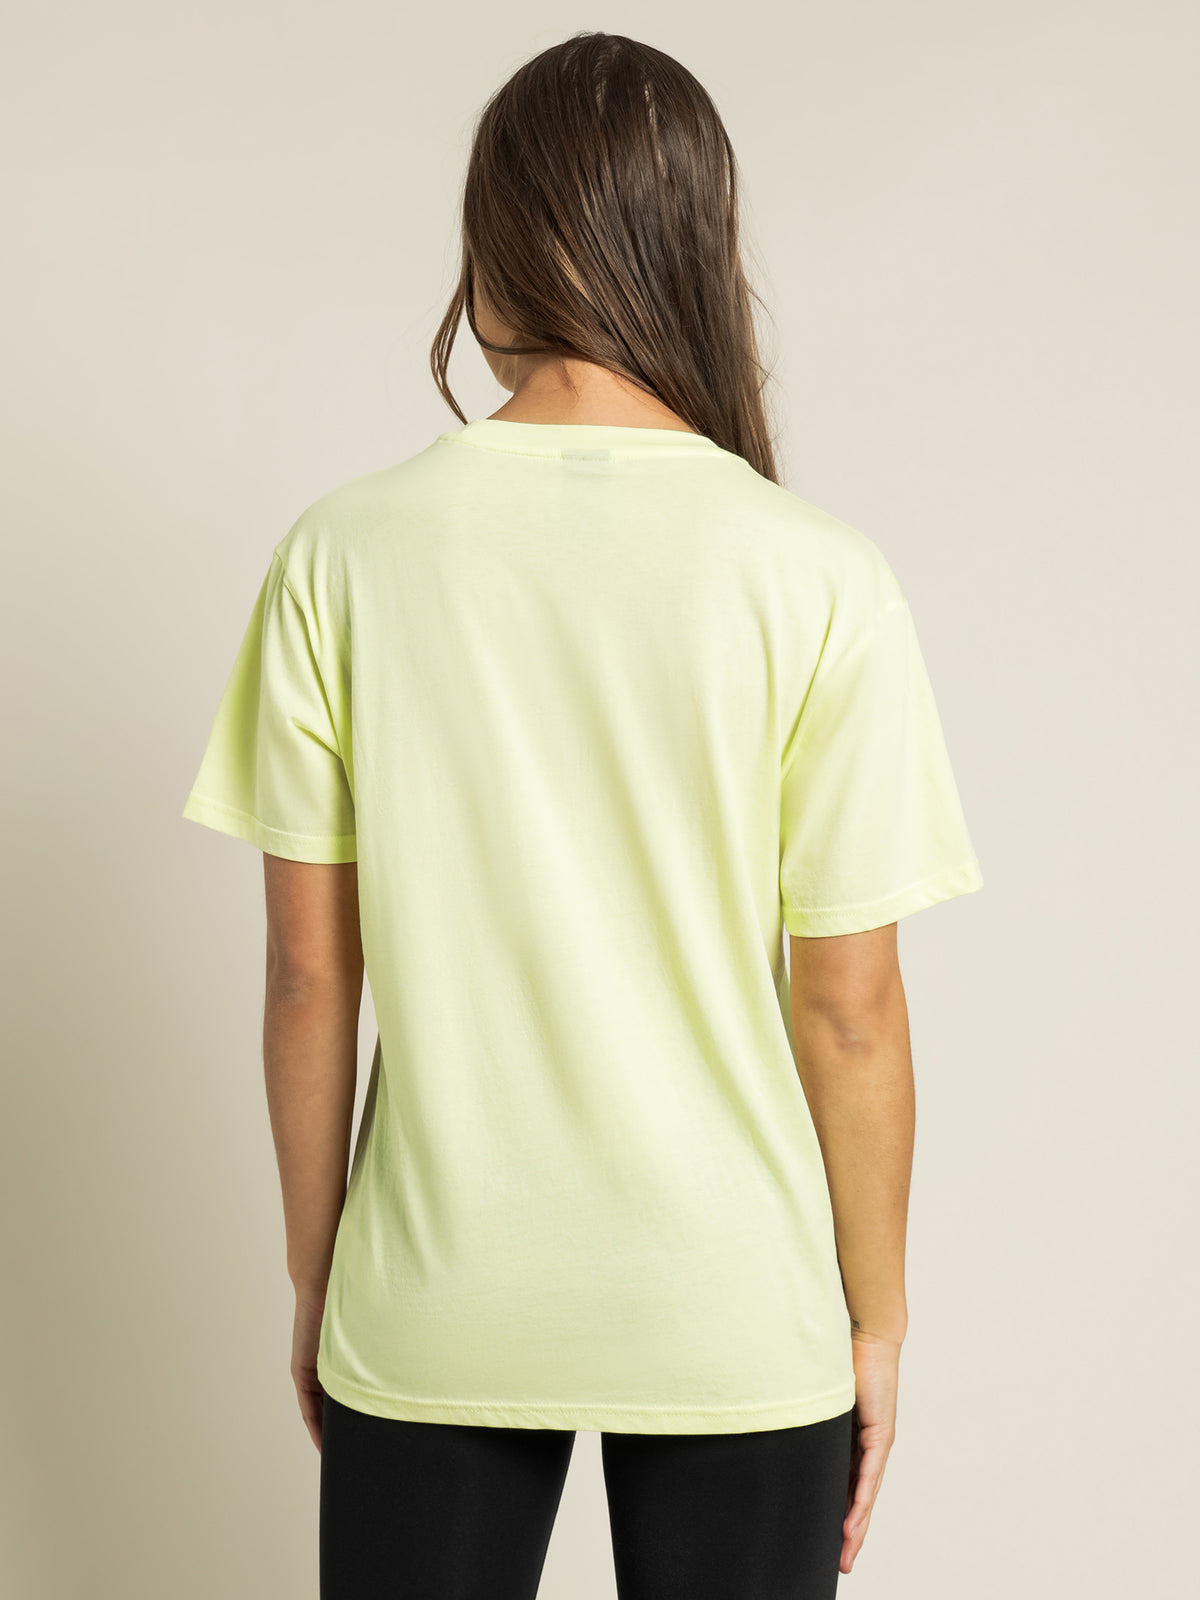 Heads Up T-Shirt in Yellow